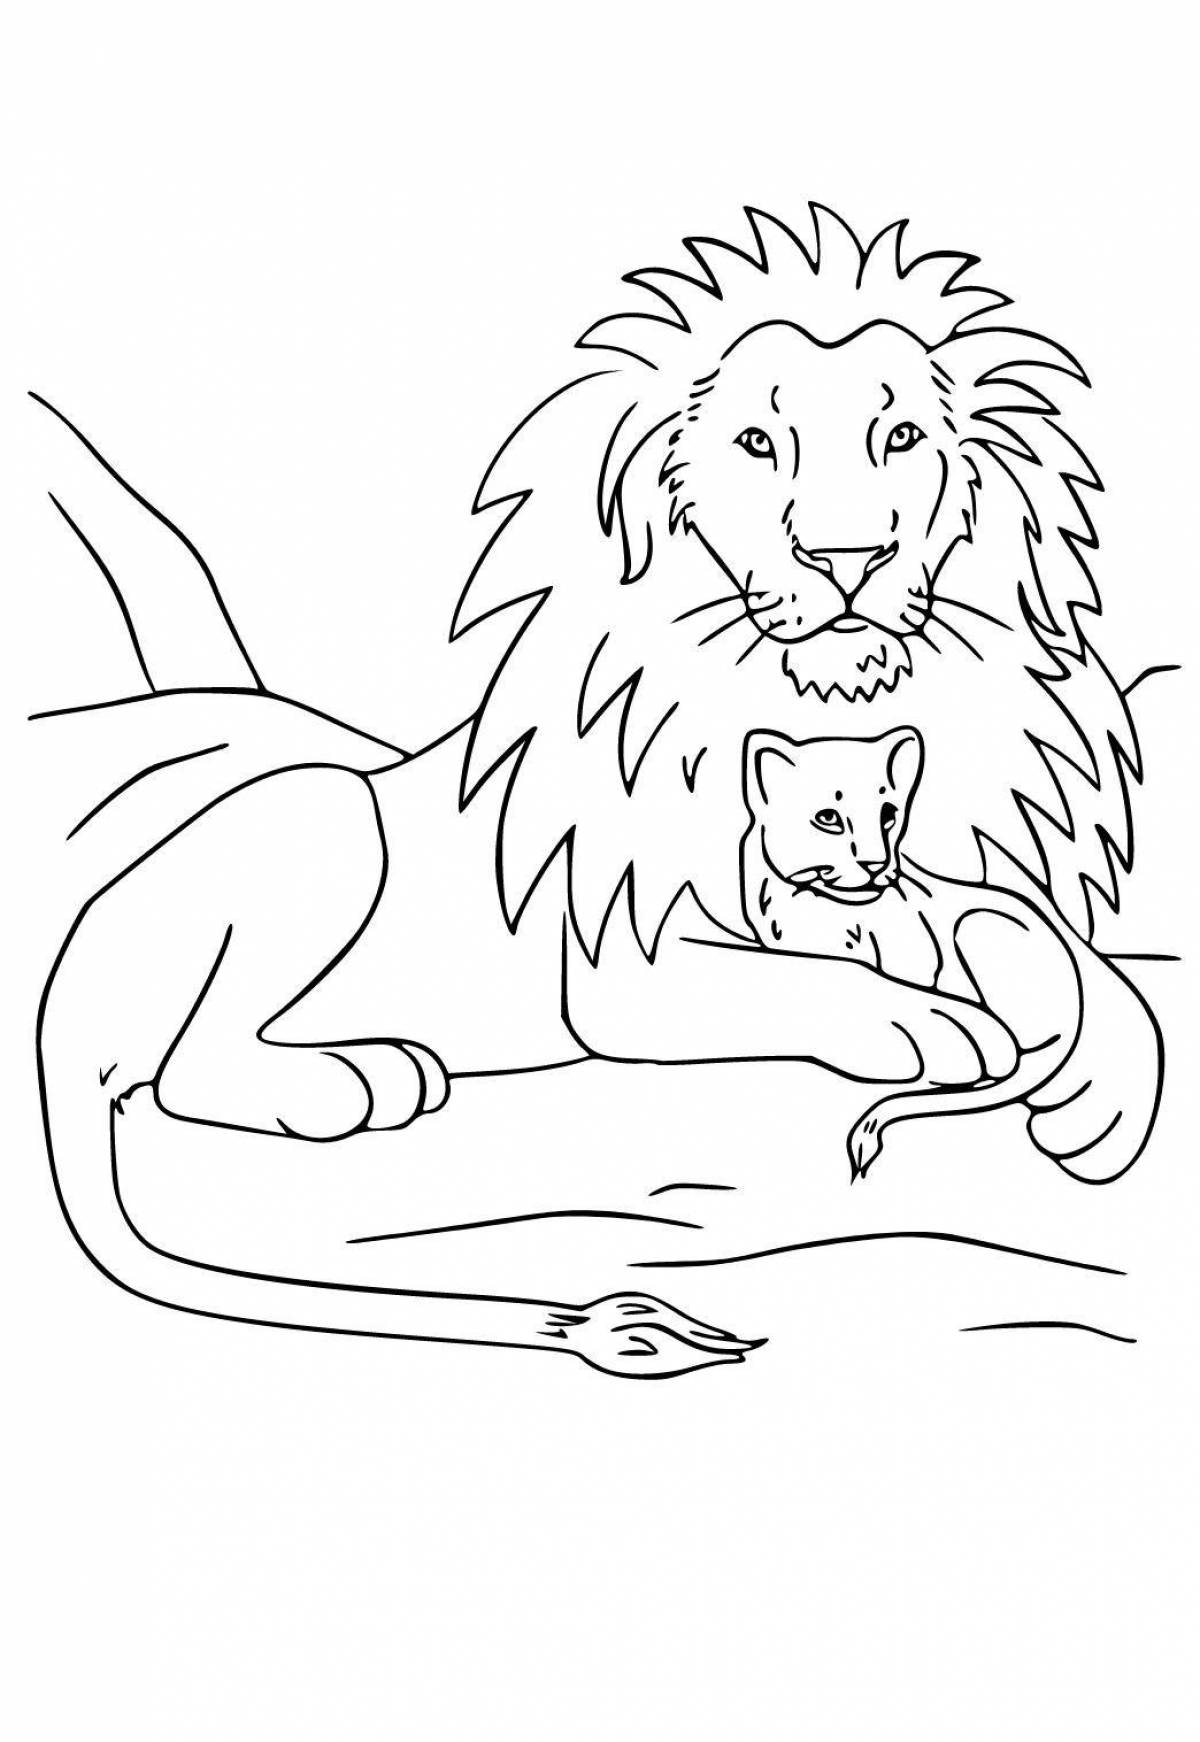 Generous lion coloring page for children 6-7 years old